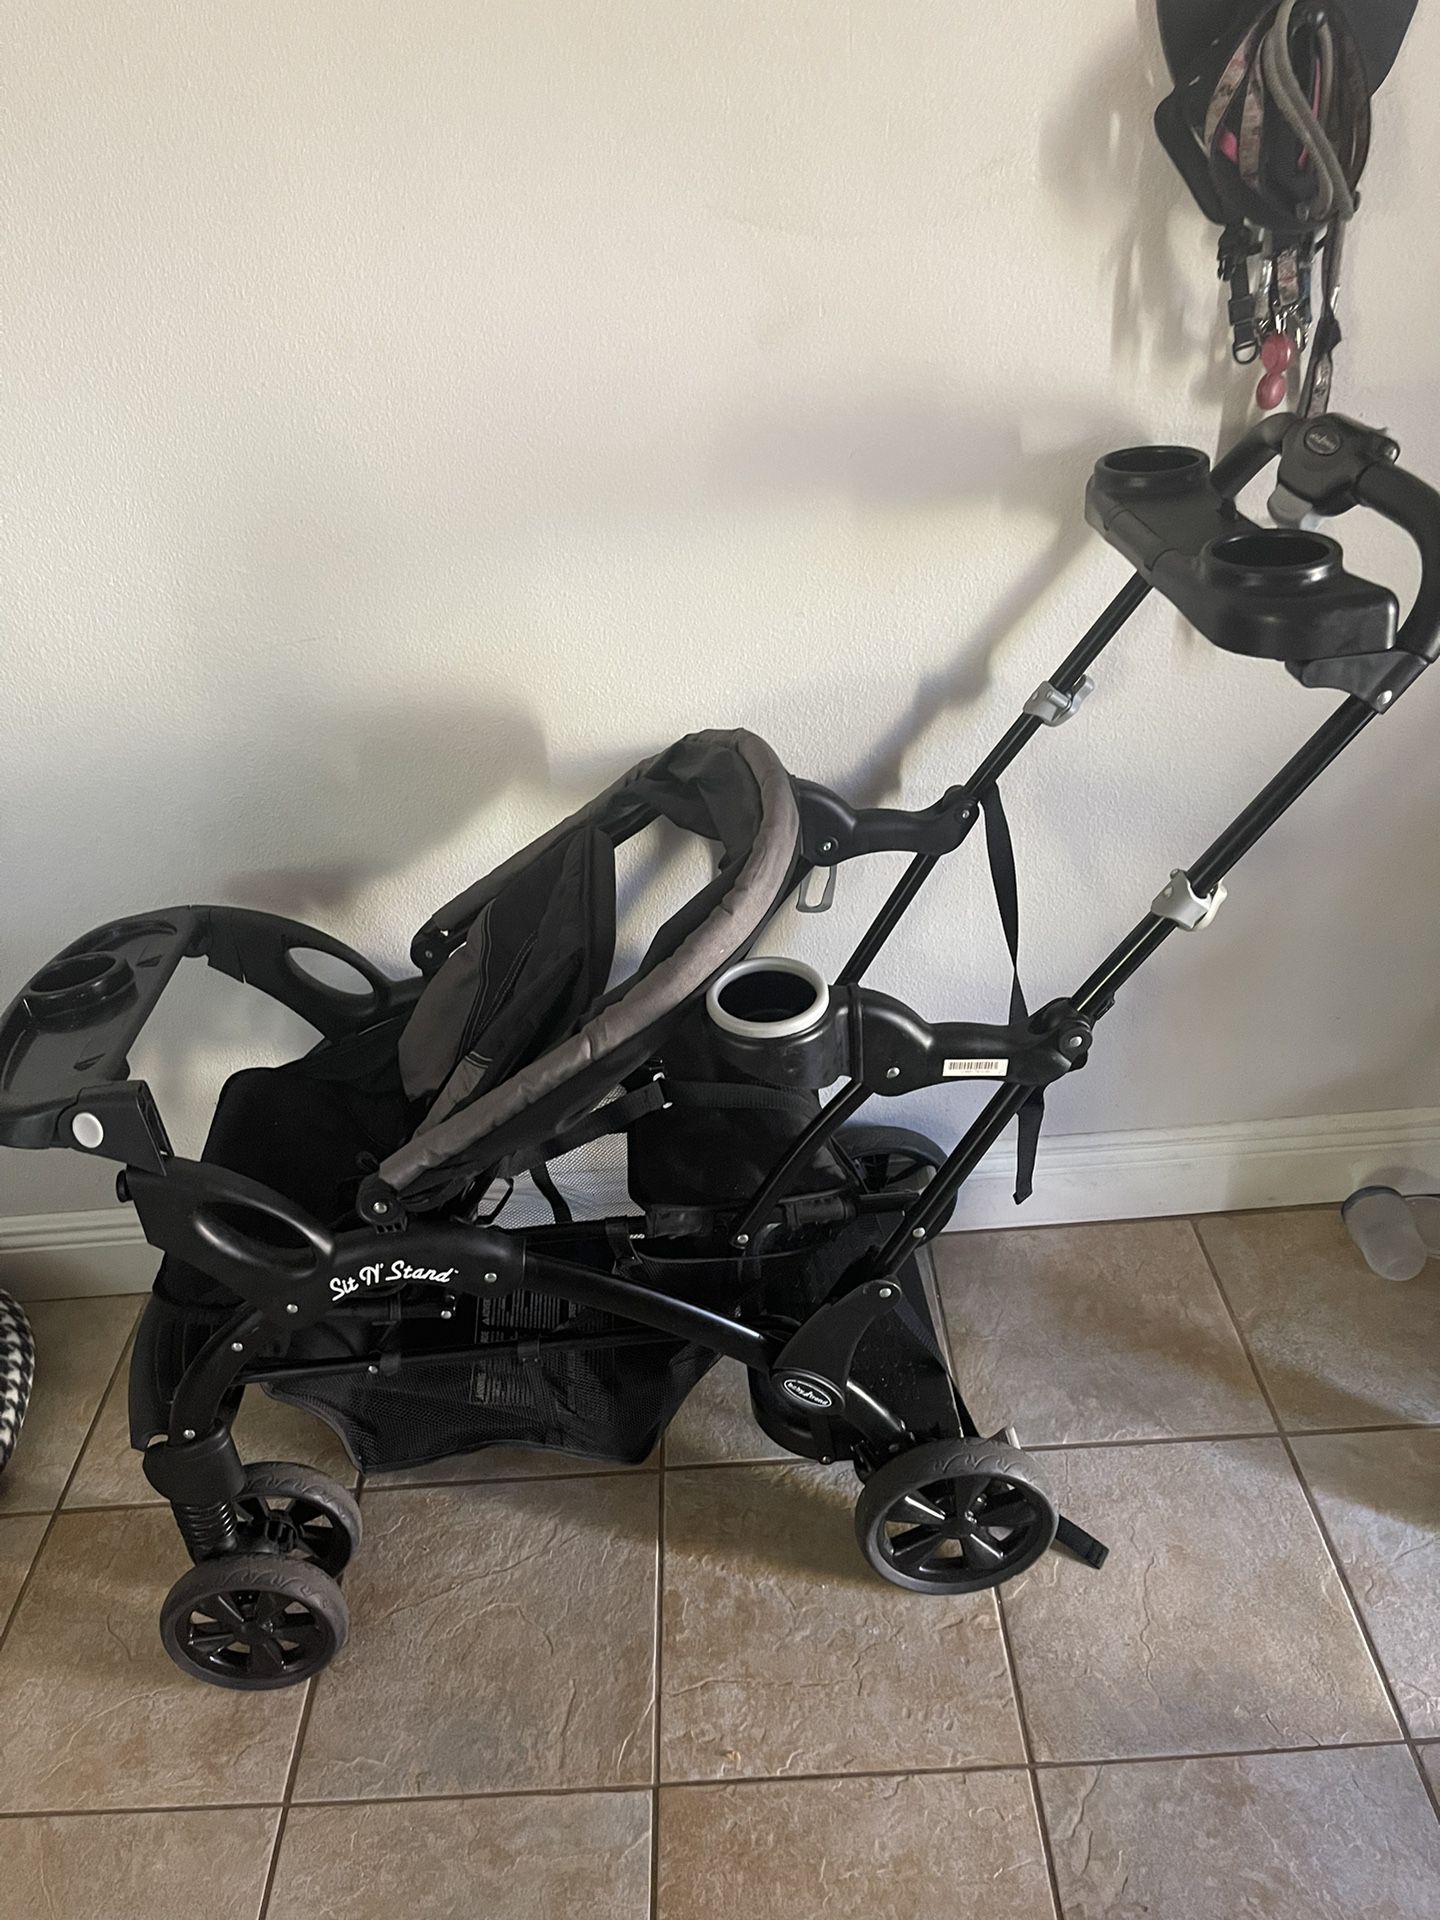 Sit and Stand Double Stroller 